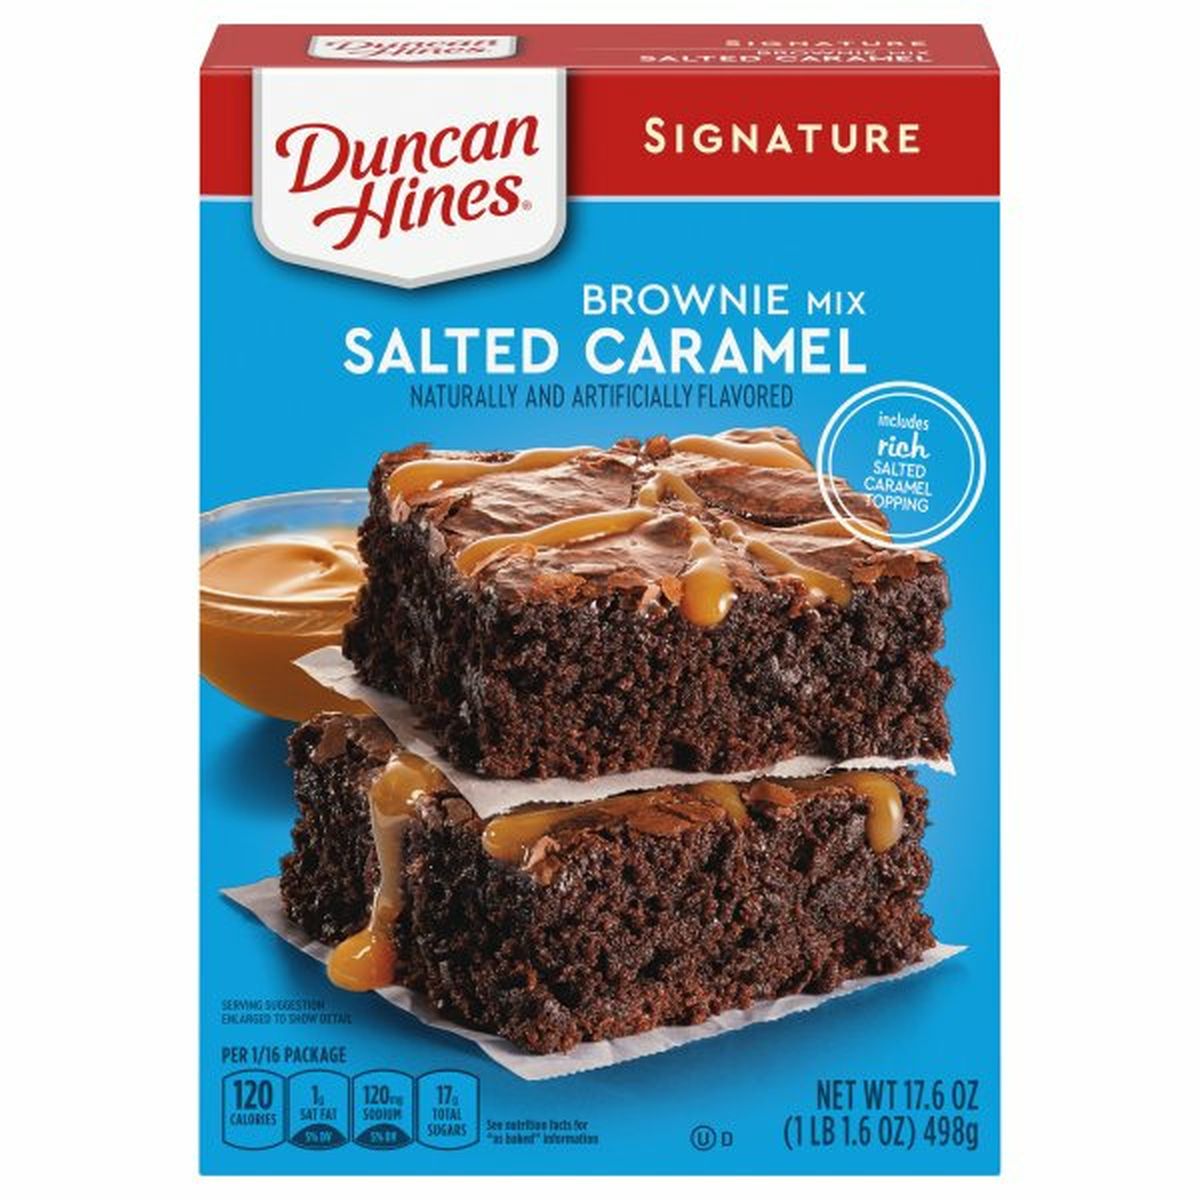 Calories in Duncan Hines Signature Brownie Mix, Salted Caramel